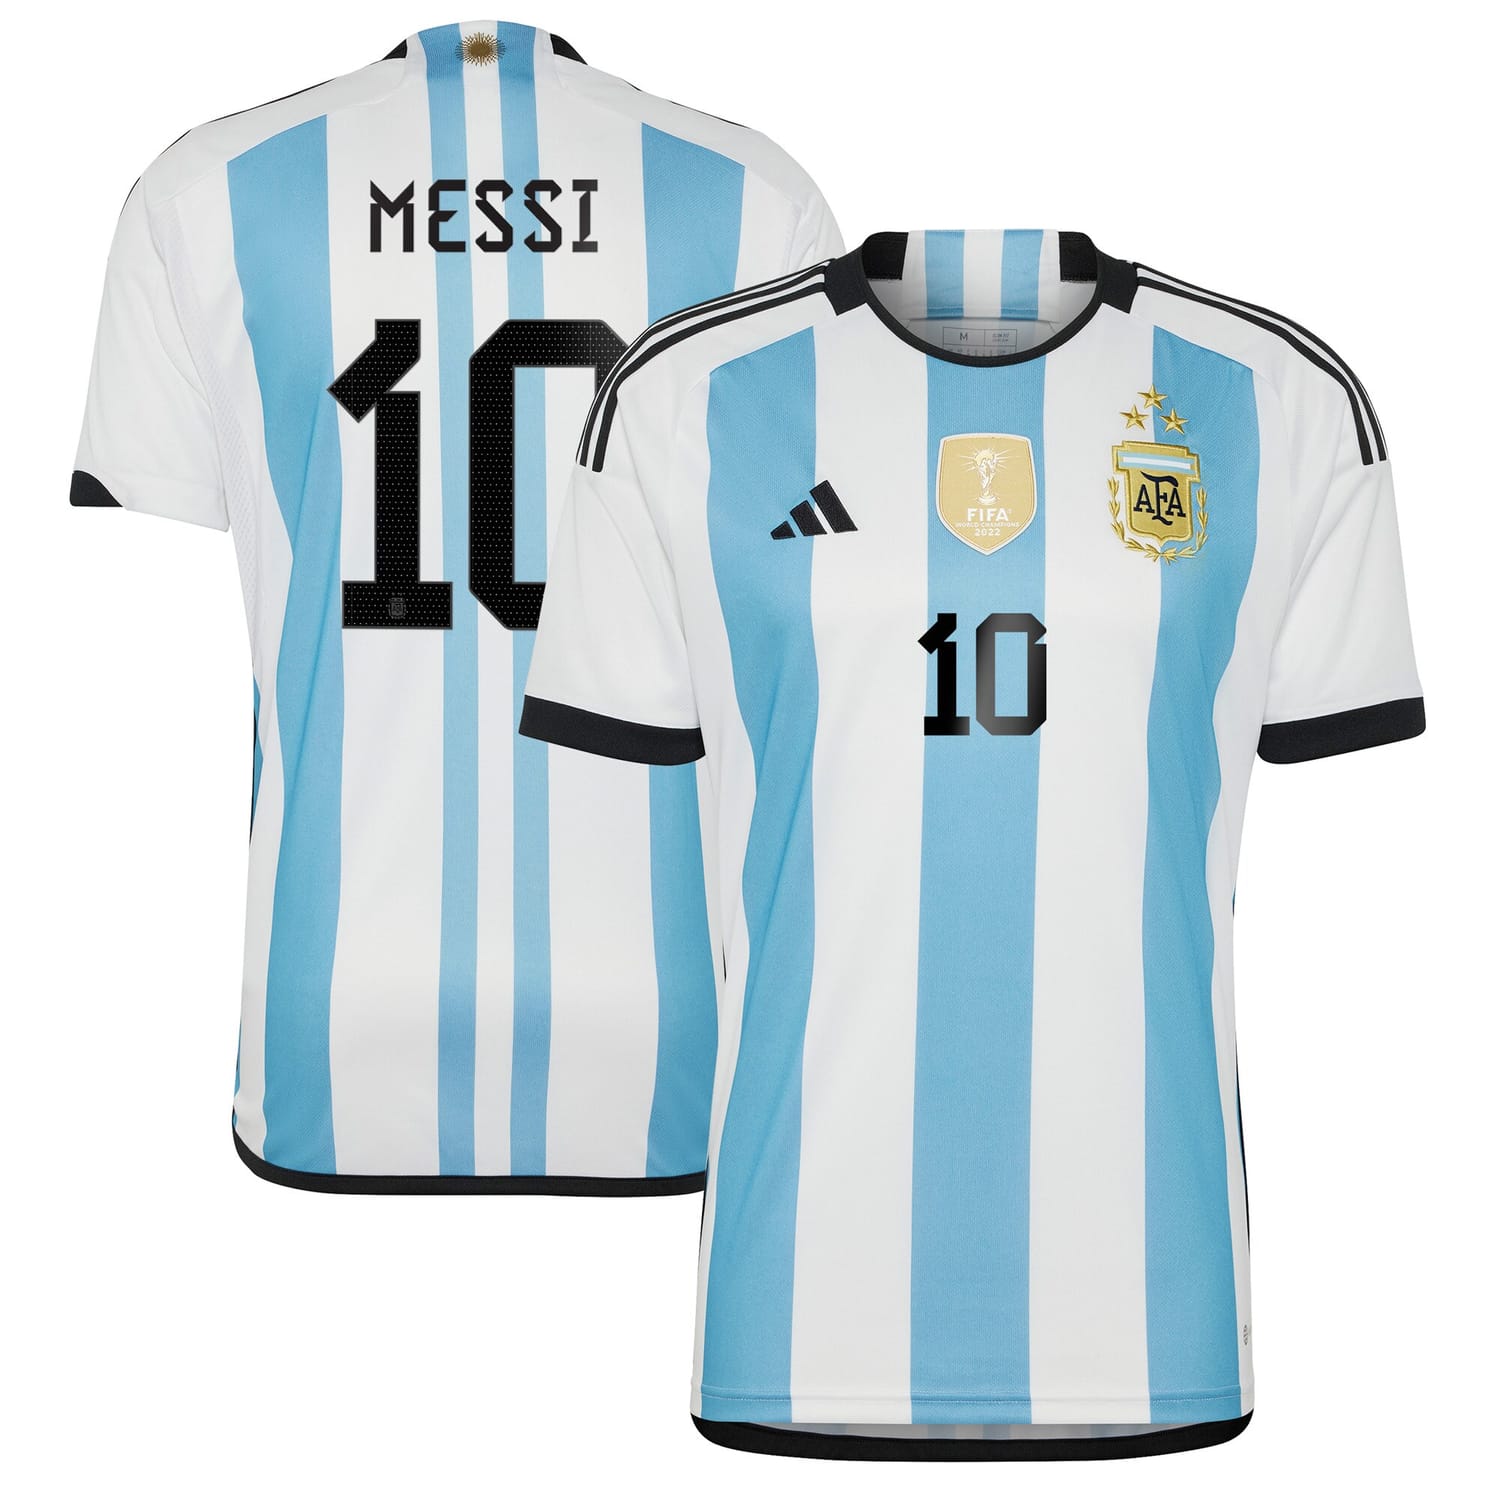 Argentina National Team Home Winners Jersey Shirt White/Light Blue 2022 player Lionel Messi printing for Men